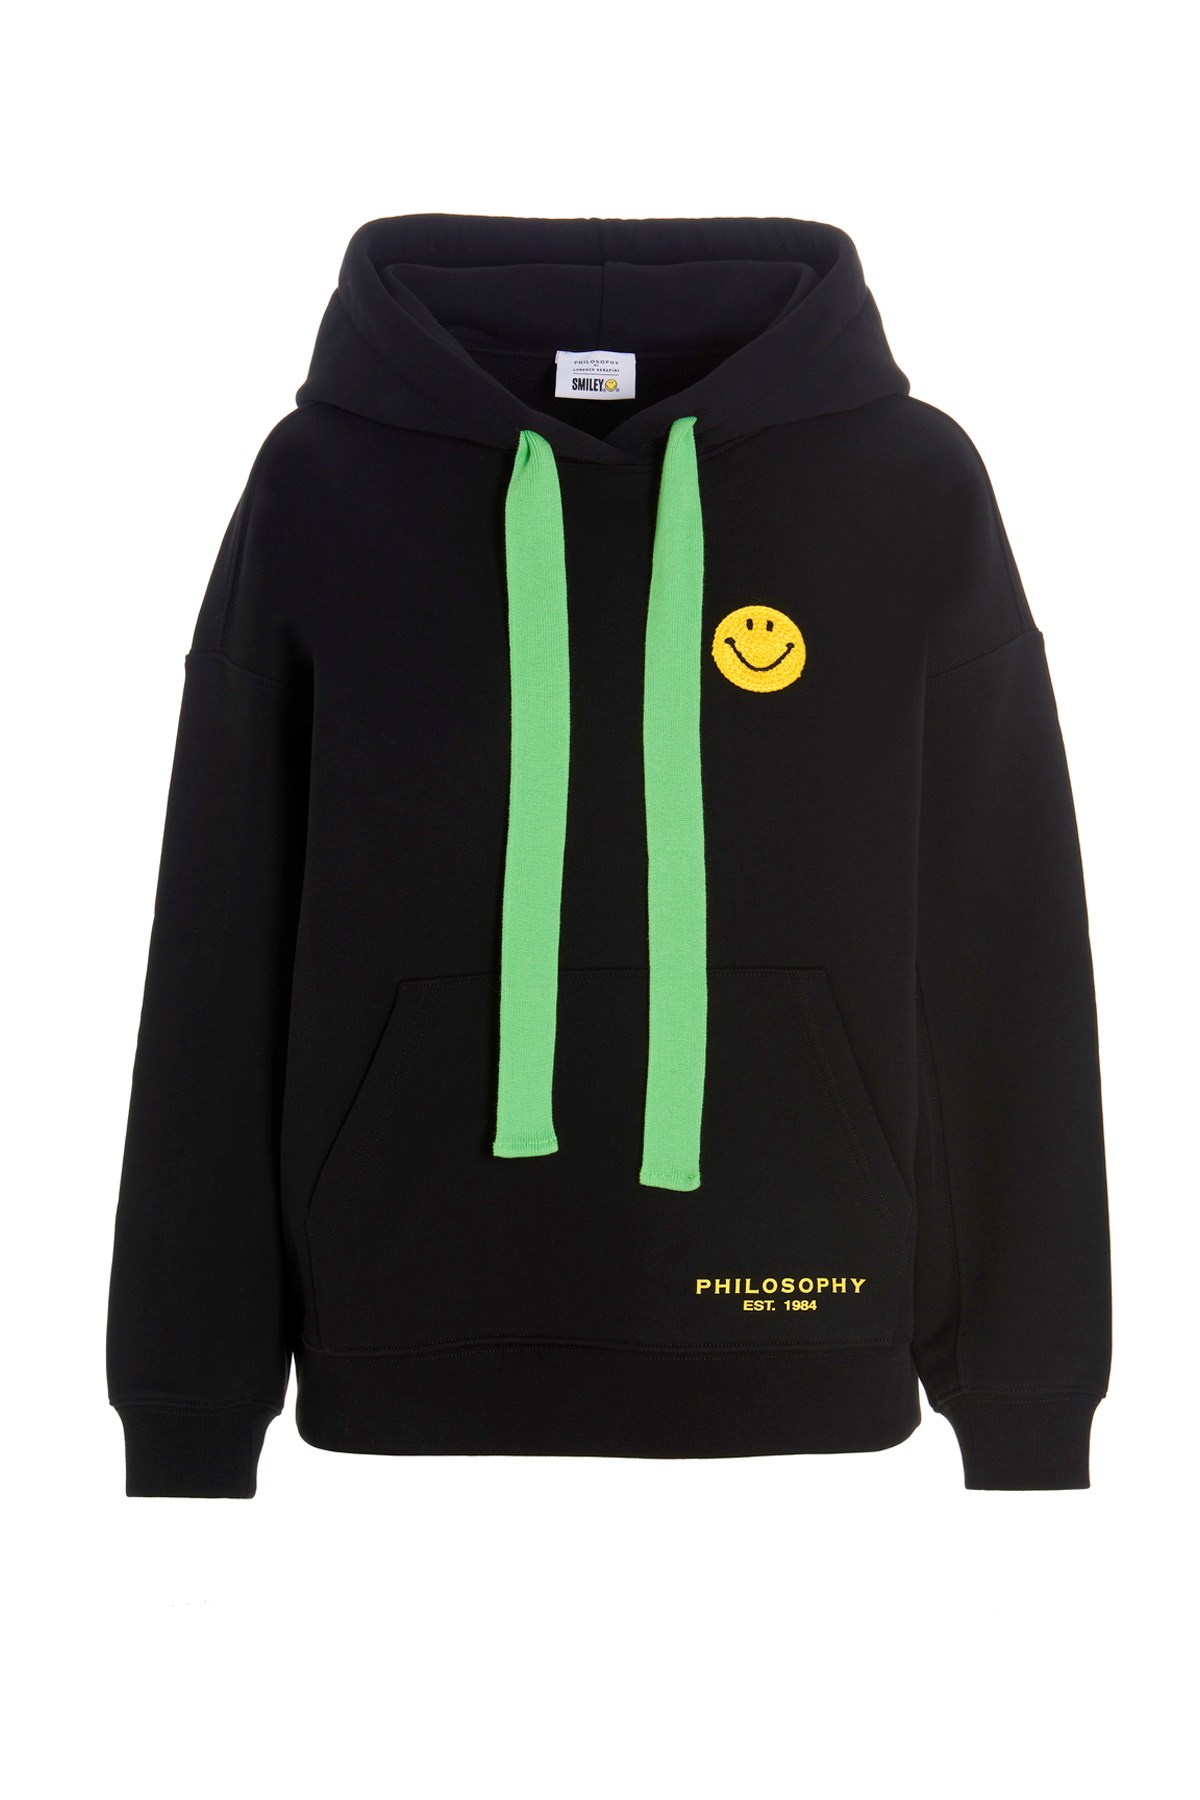 PHILOSOPHY 'Take The Time To Smile’ Capsule Hoodie